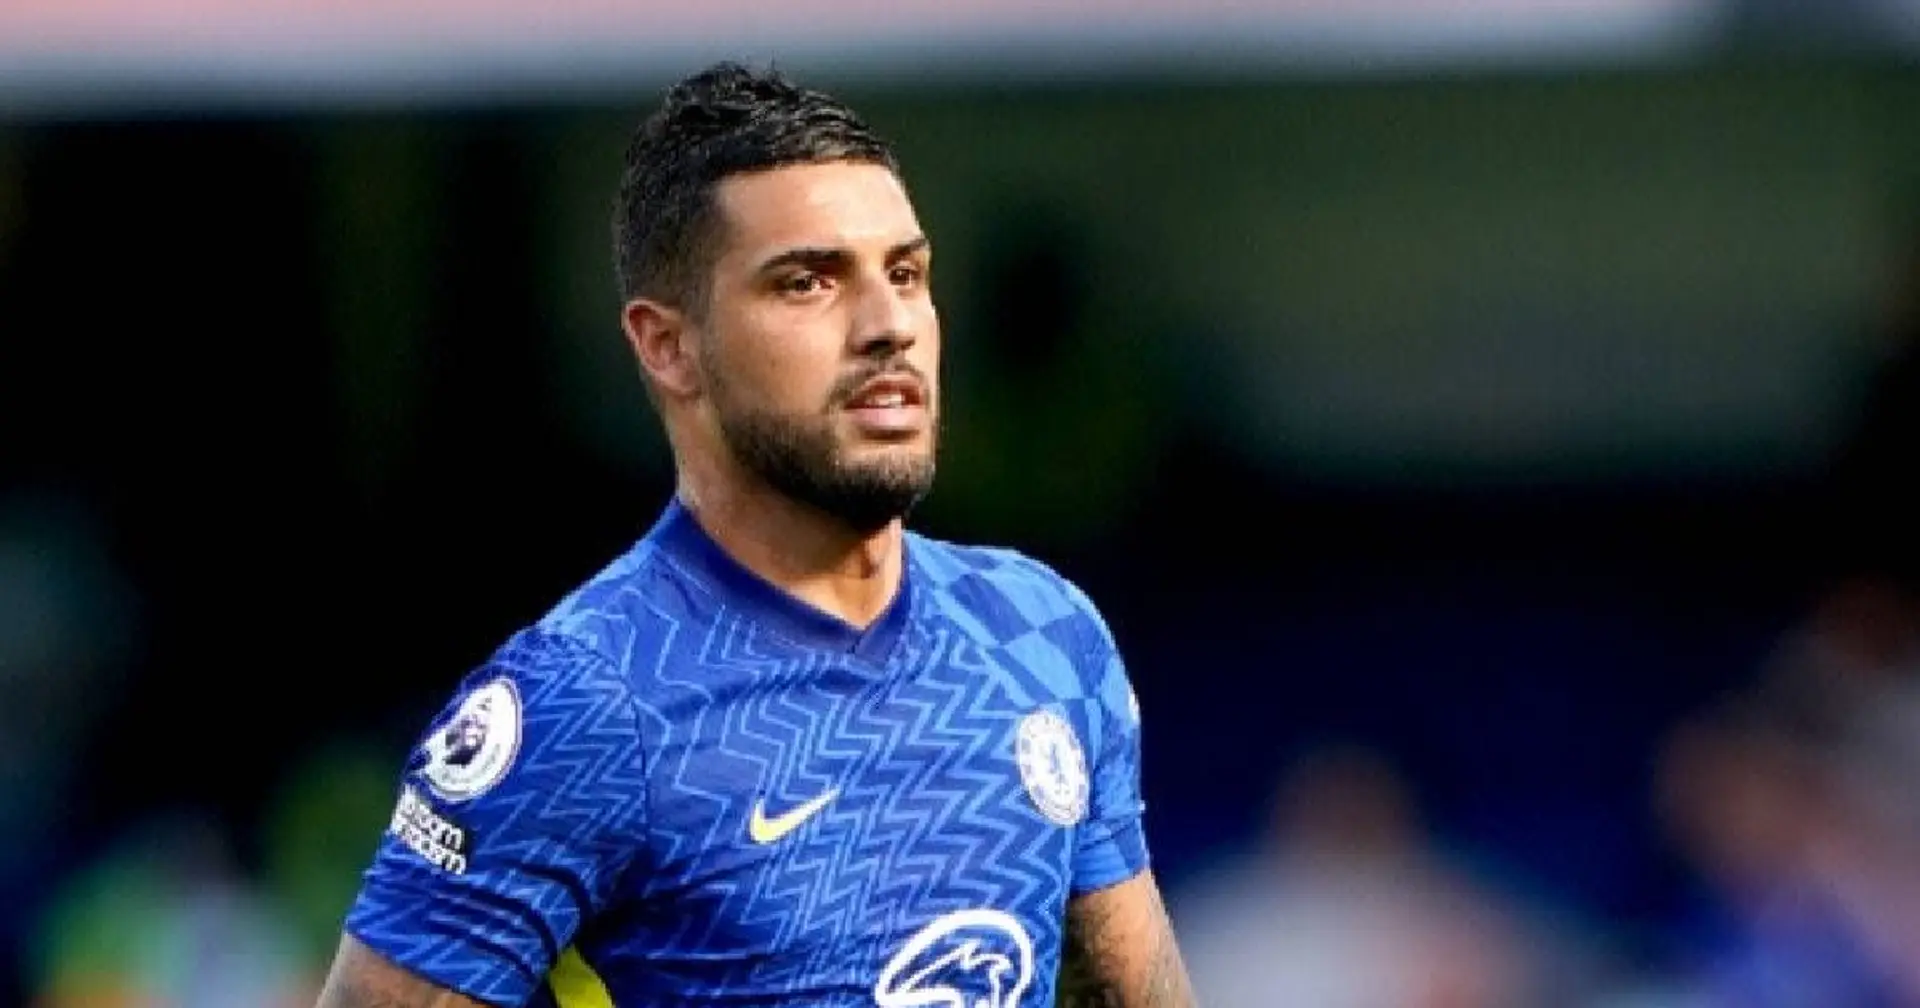 Serie A giants & newly-promoted Prem side want Emerson (reliability: 5 stars)